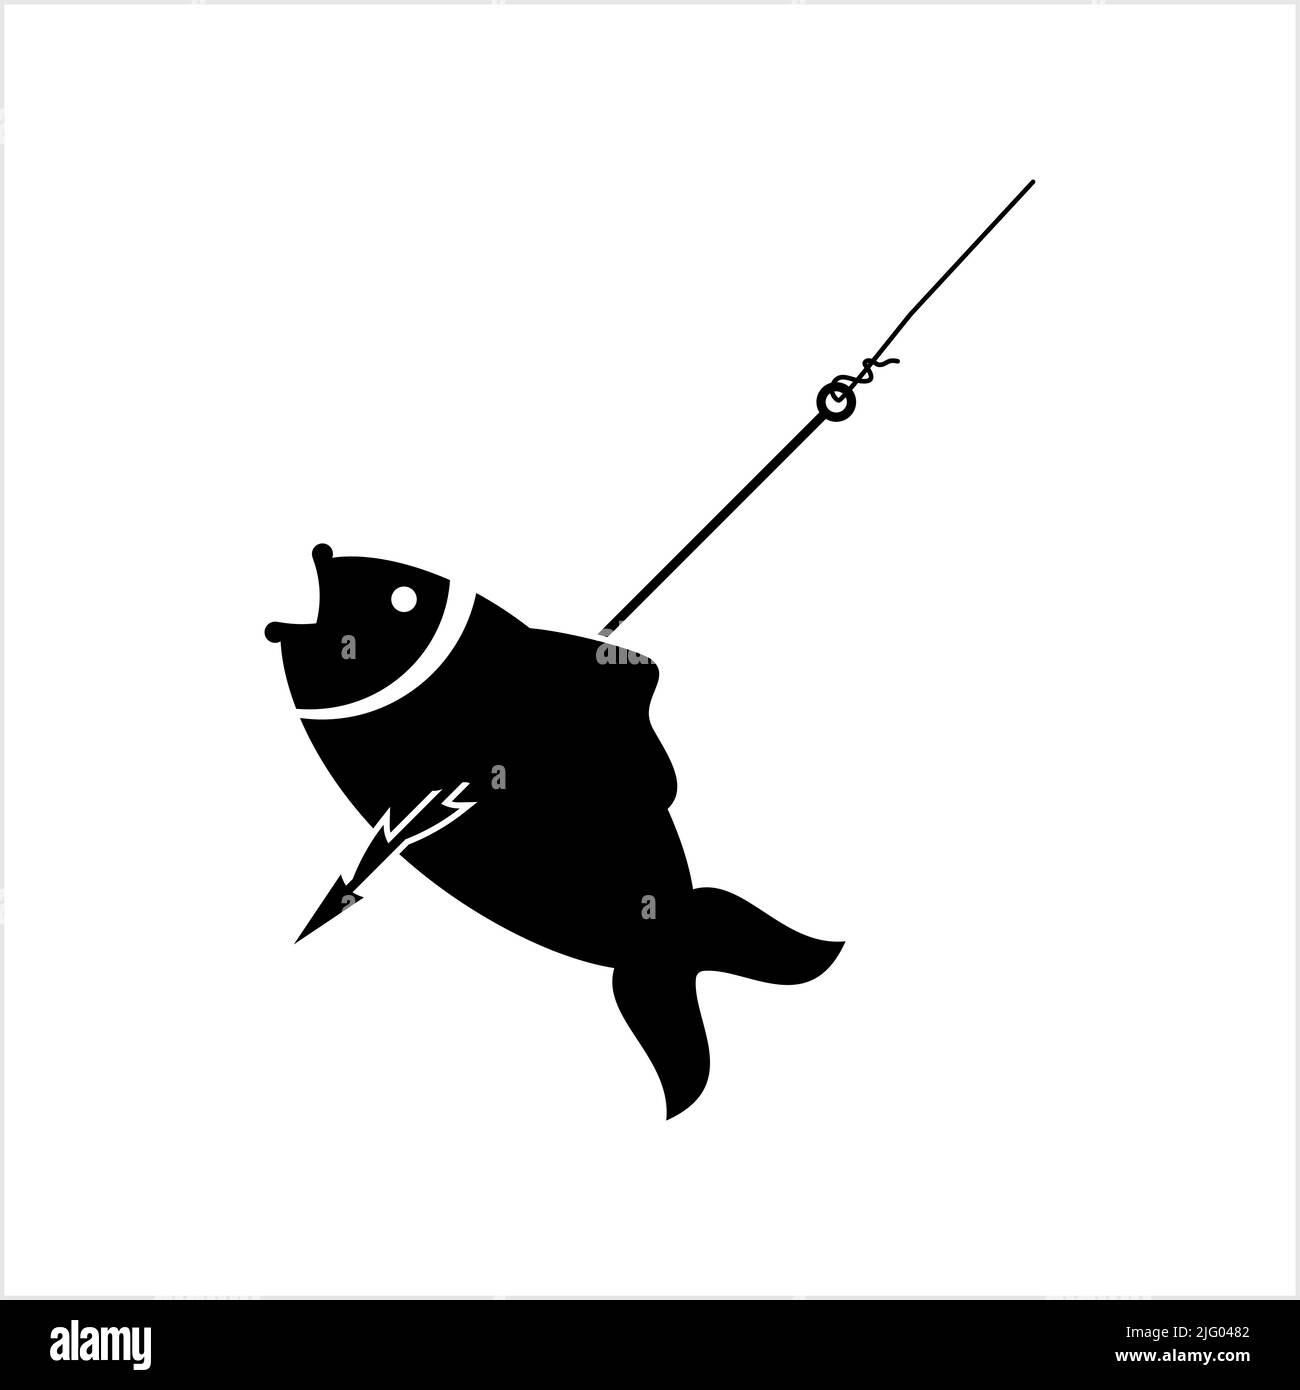 Spear fishing Black and White Stock Photos & Images - Alamy